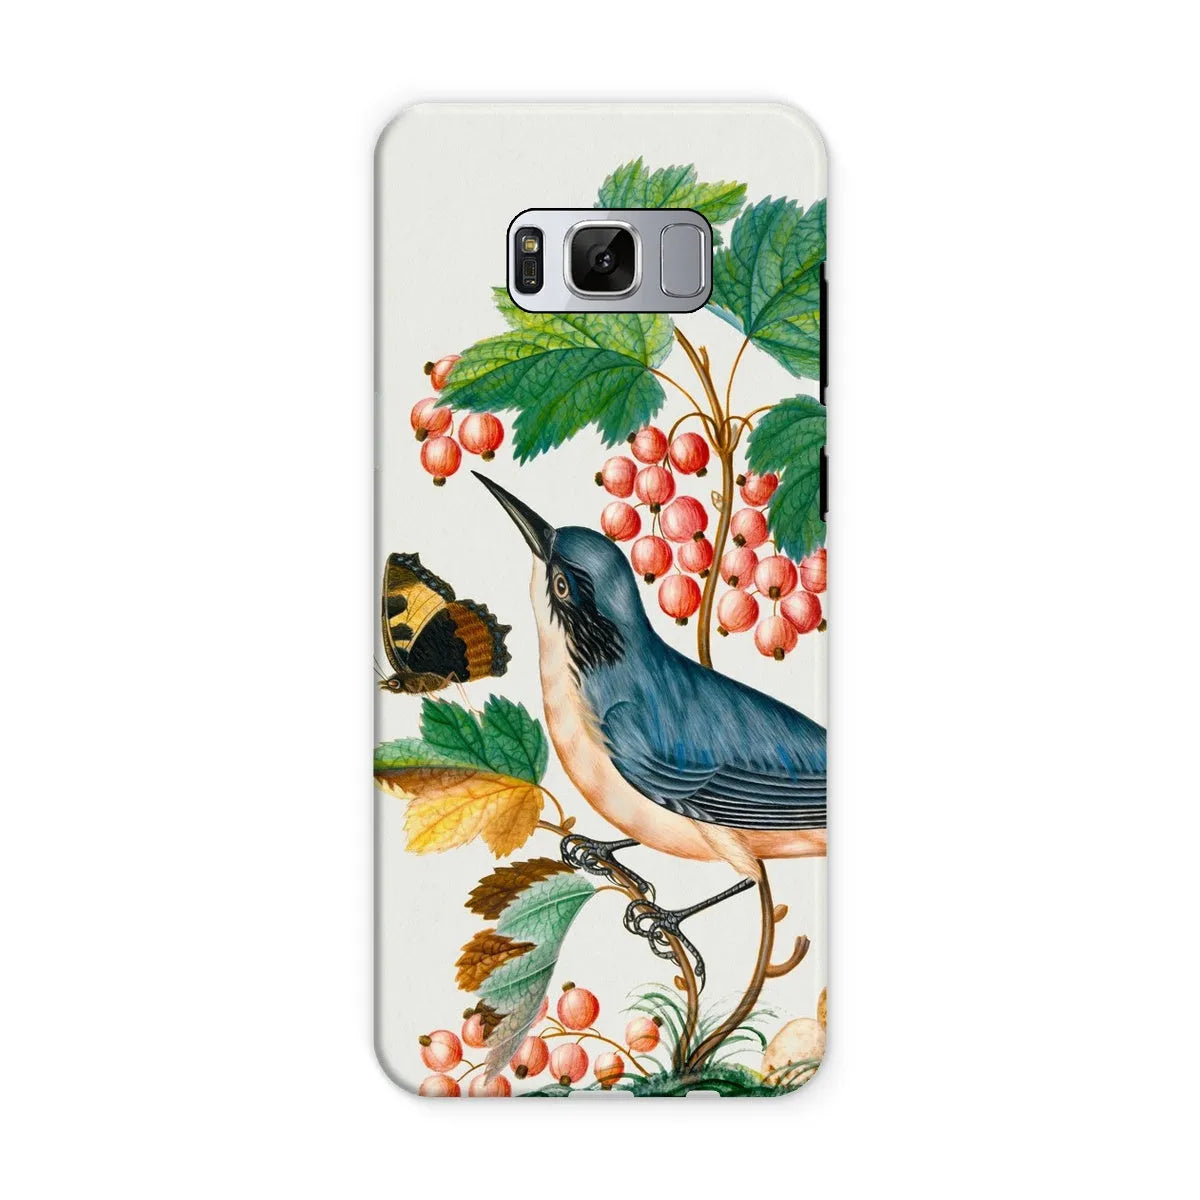 Warbler Admiral Wasps & Ants - Art Phone Case - James Bolton - Samsung Galaxy S8 / Matte - Mobile Phone Cases